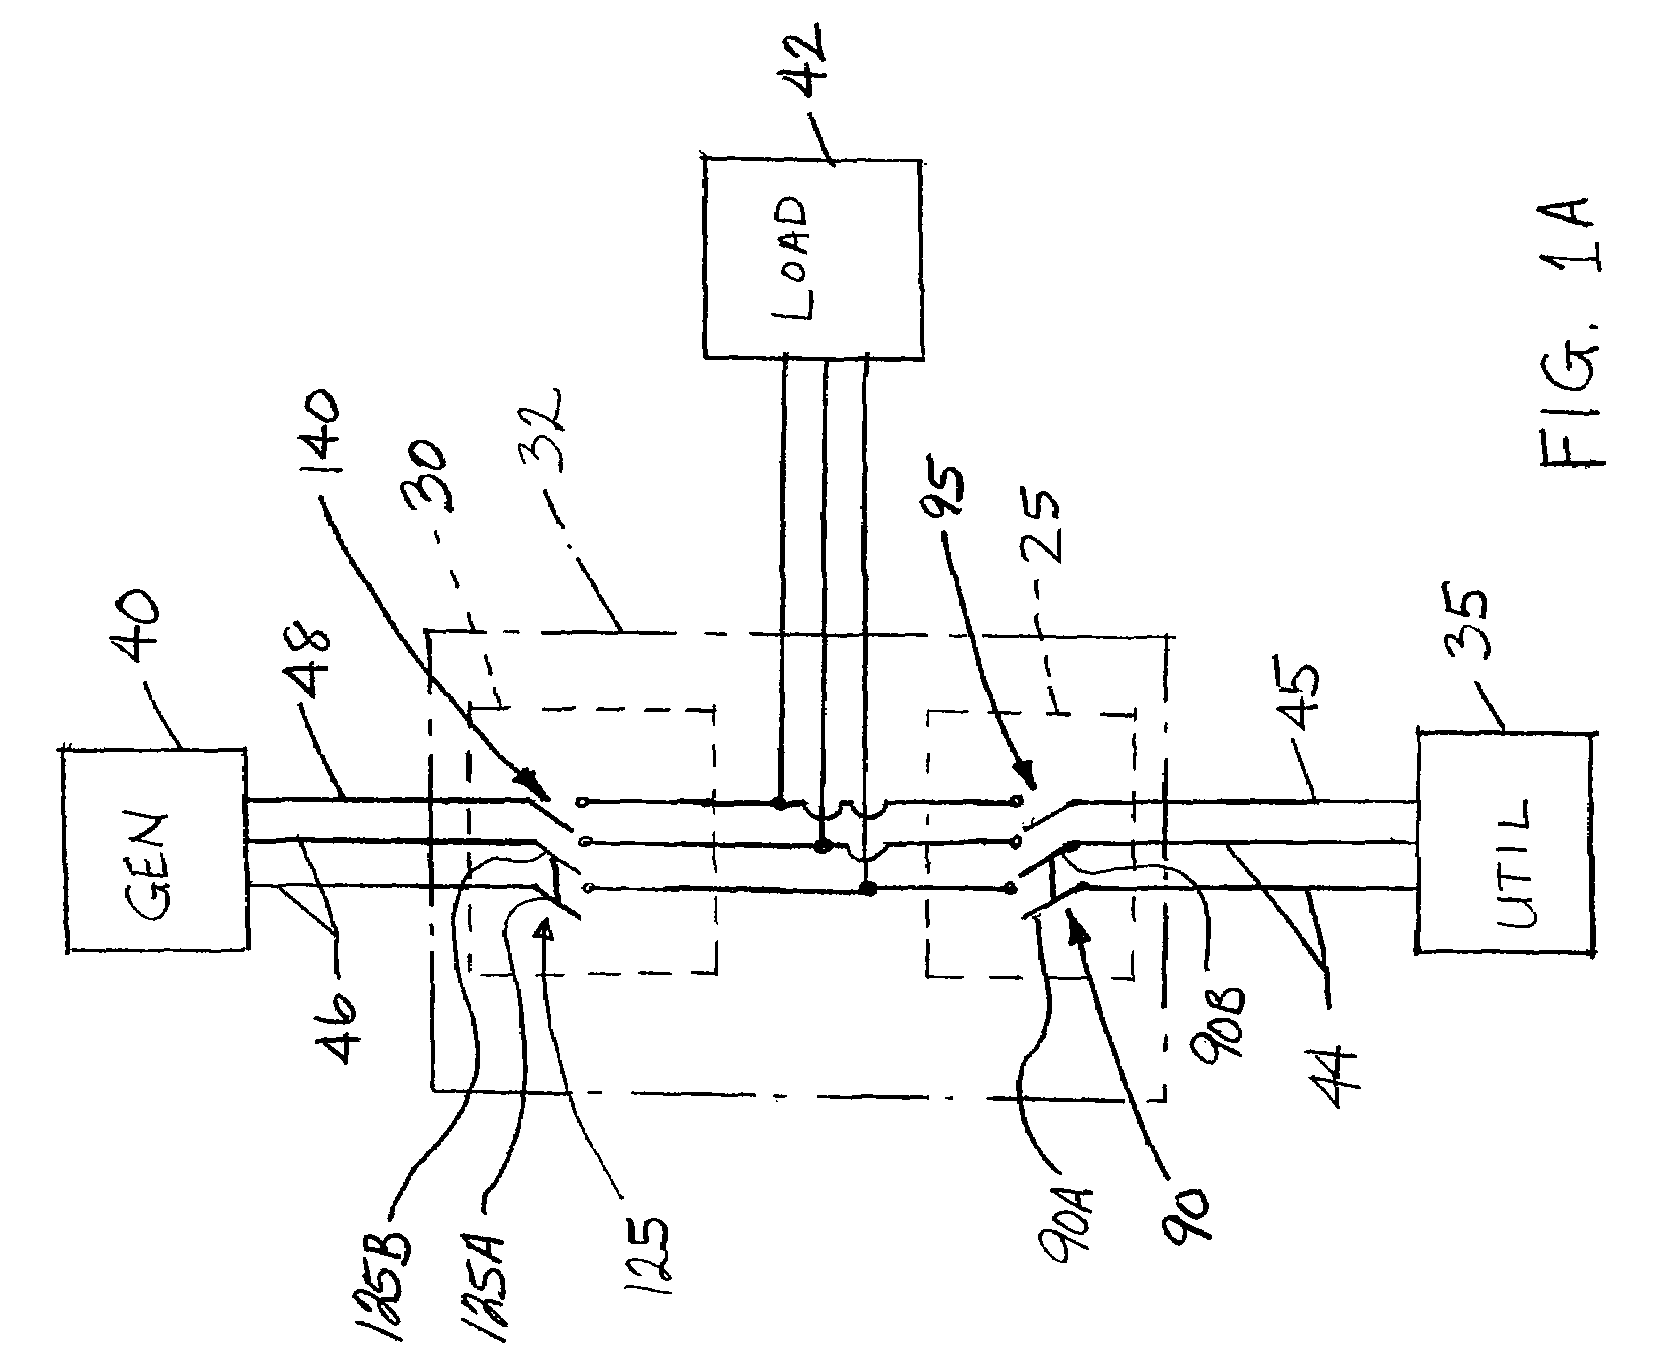 Method of sequentially actuating power supply switches including a neutrally connected switch